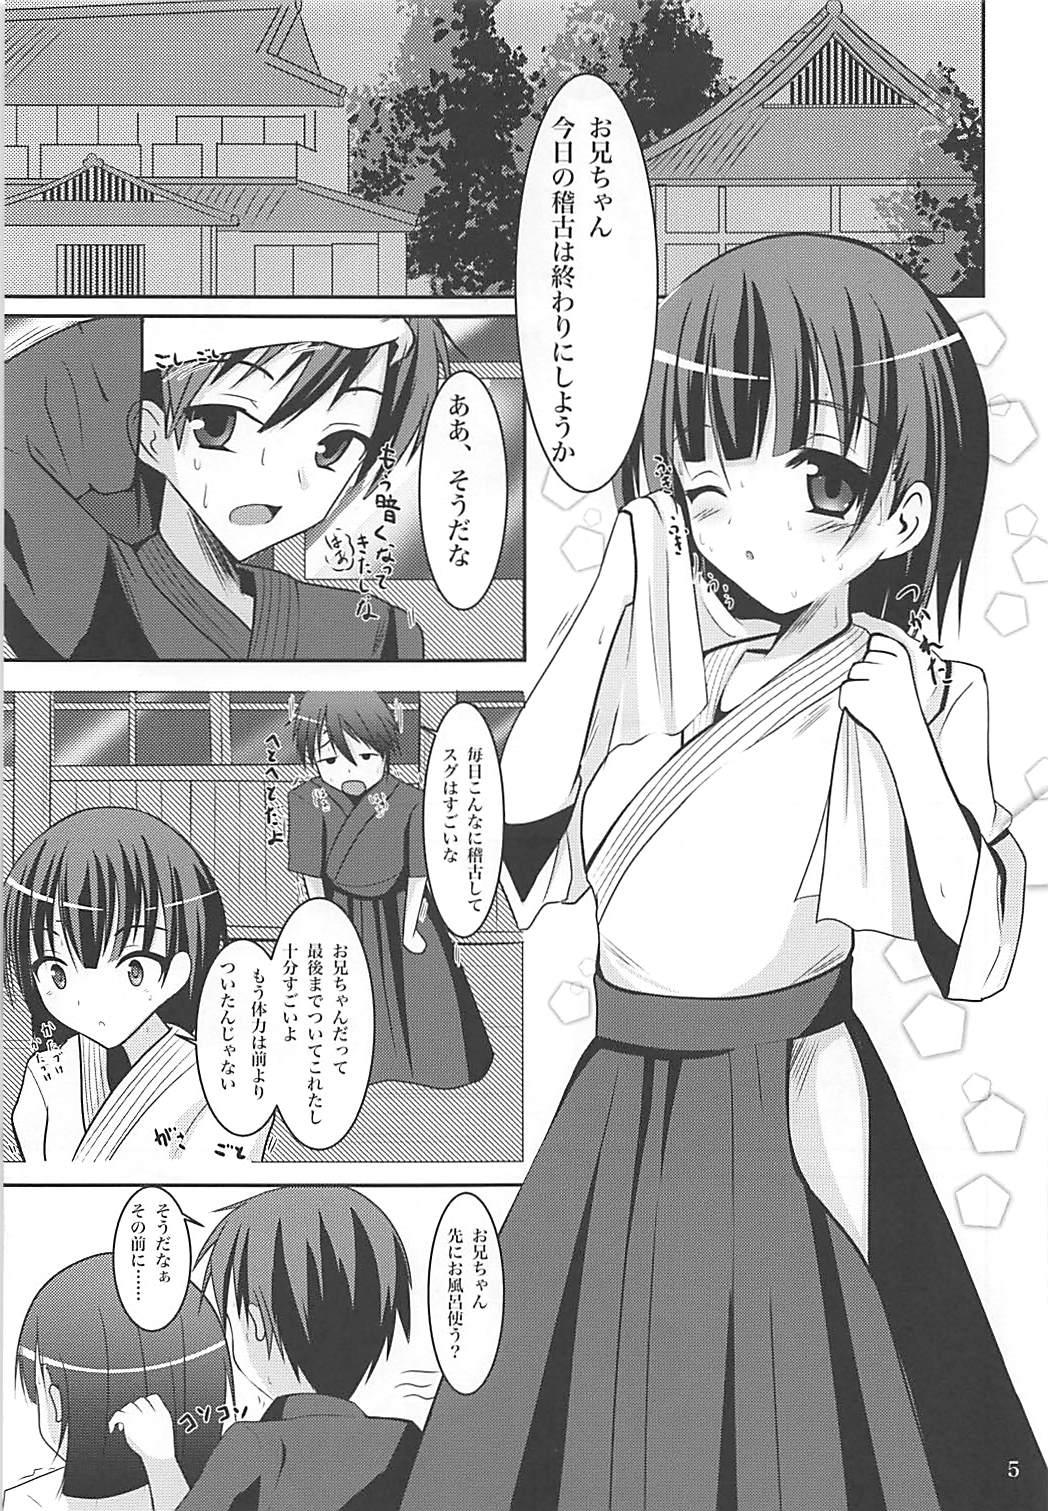 Toys Suguha Route Kocchi to Acchi de Love Icha x 2 - Sword art online Gay Theresome - Page 4